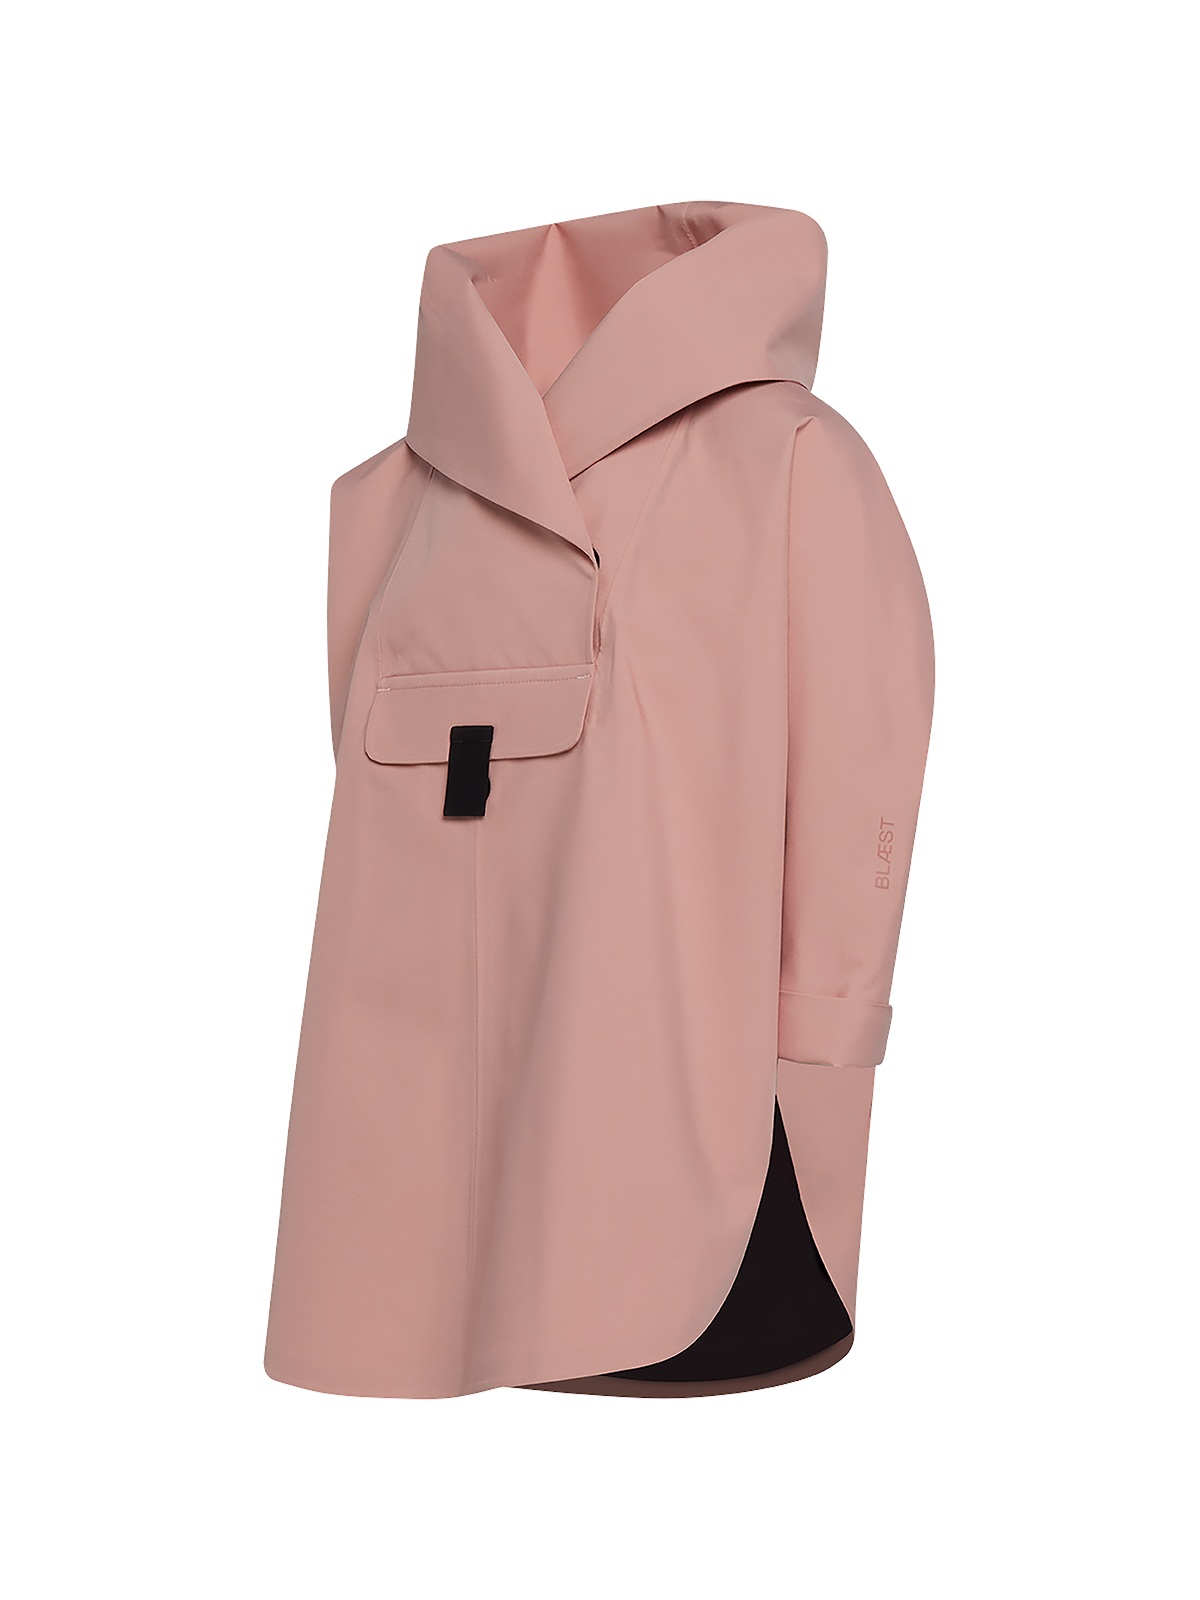 Bergen mini poncho in pink from Blæst